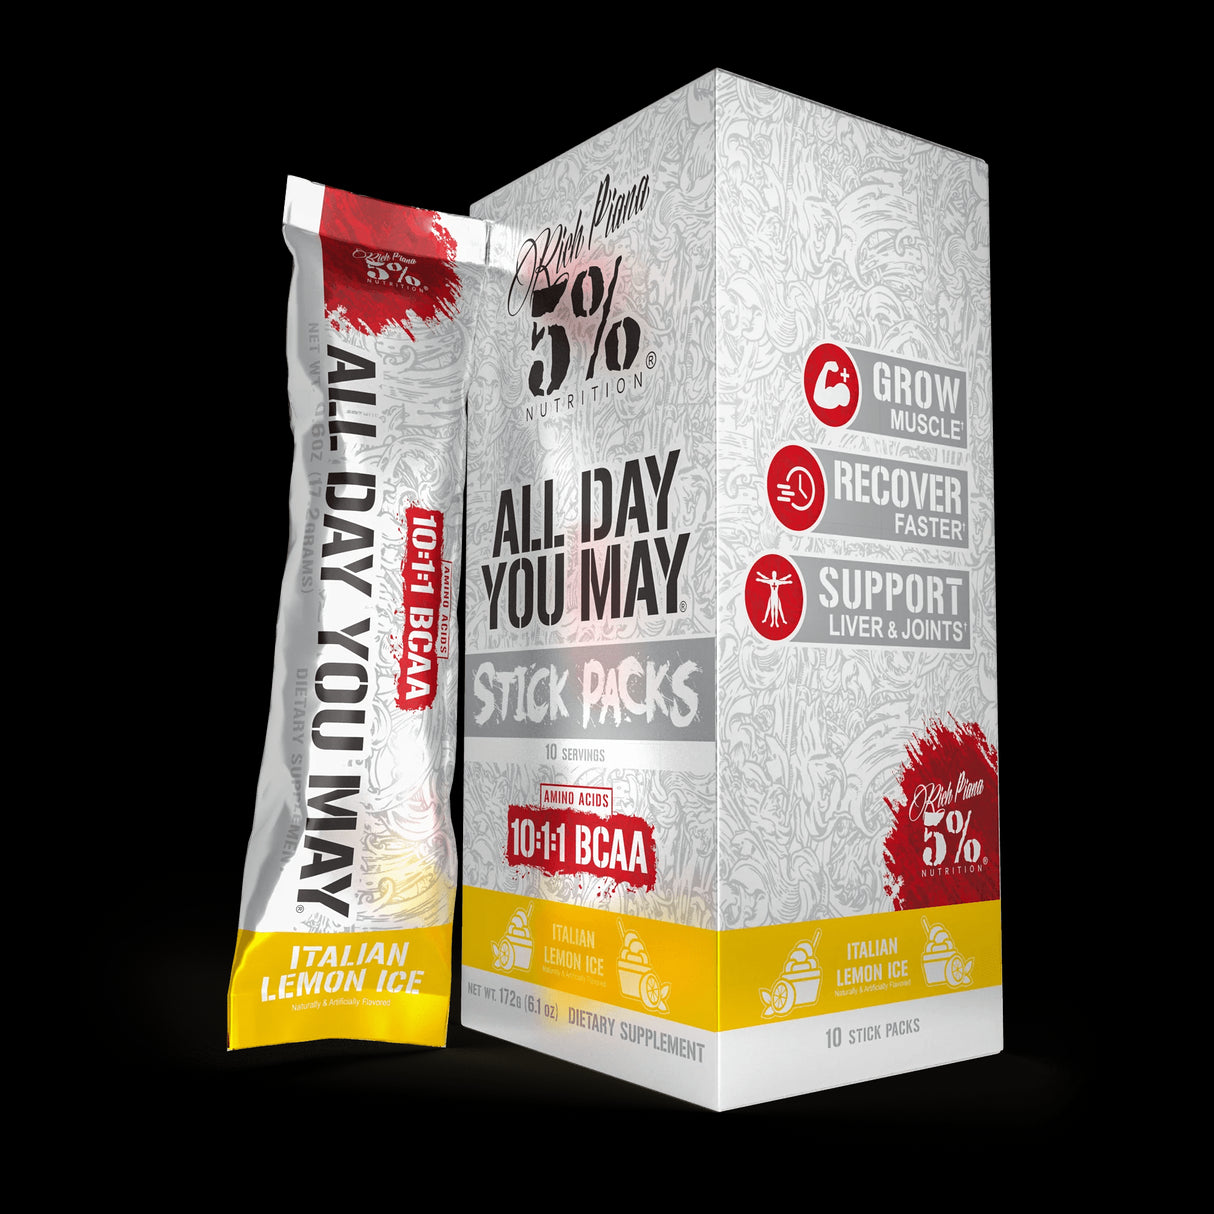 10:1:1 BCAA Sticks - All Day You May - 5% - Prime Sports Nutrition